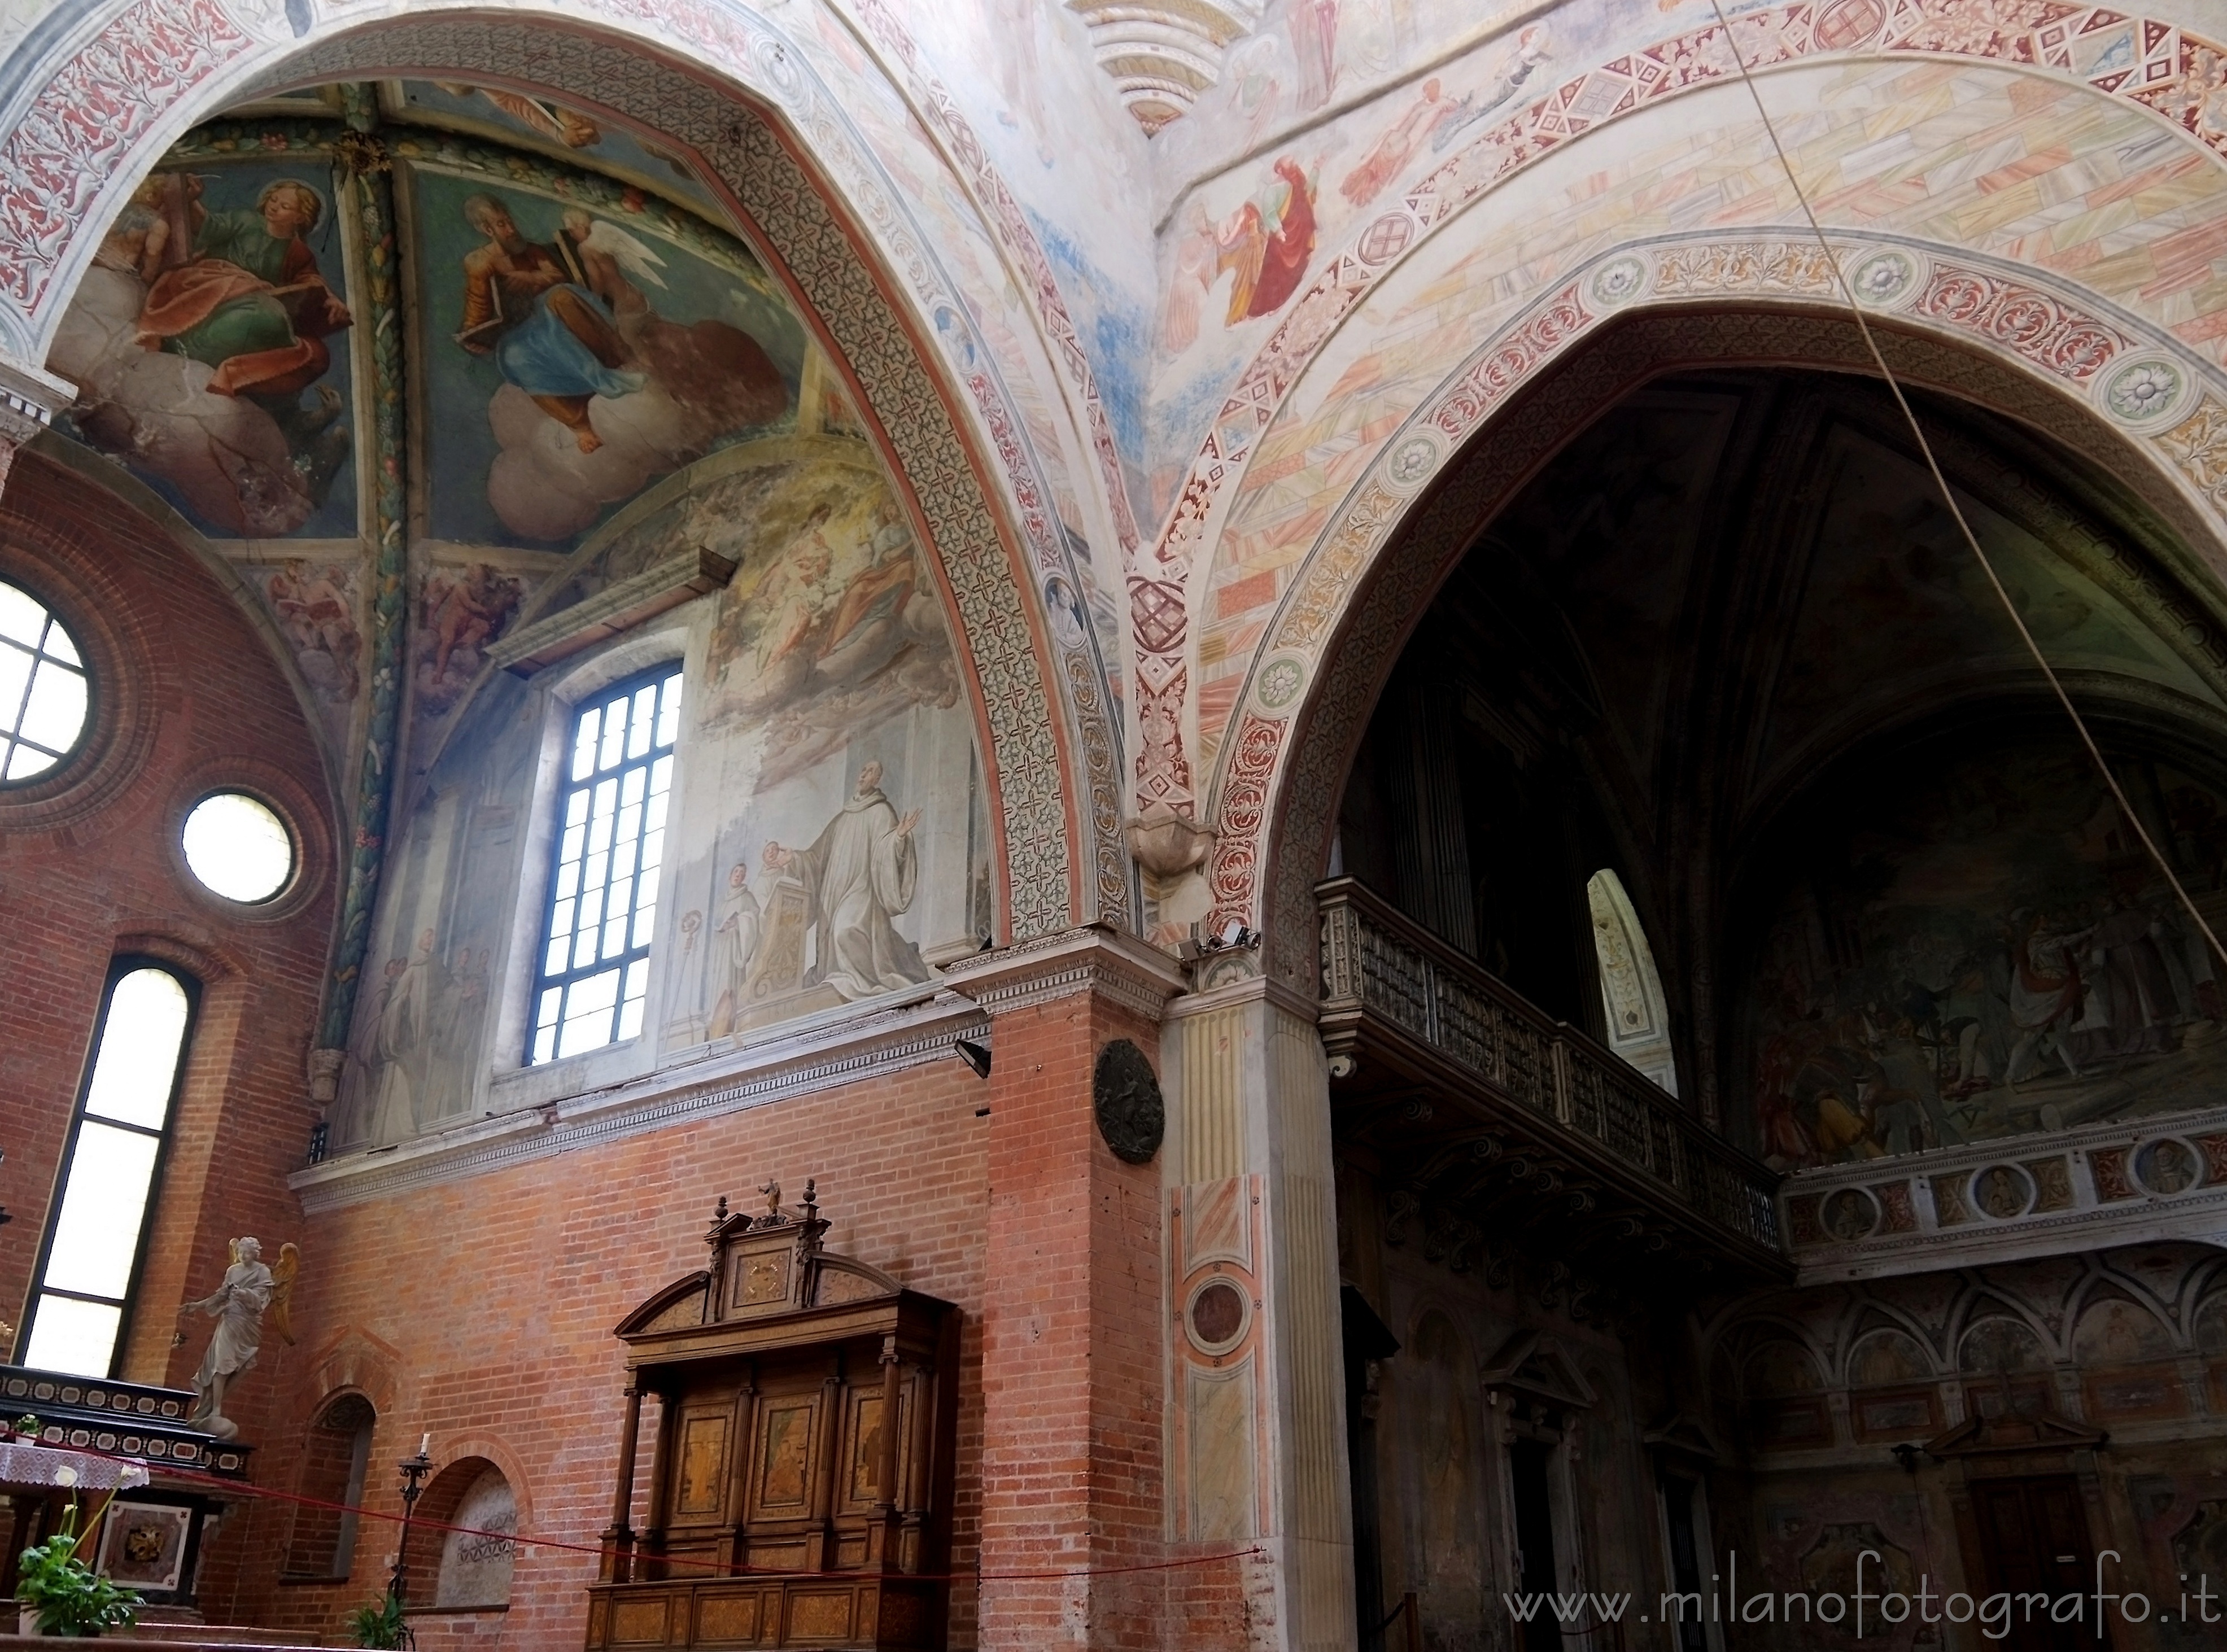 Milan (Italy): Detail of the interior of the Abbay of Chiaravalle - Milan (Italy)